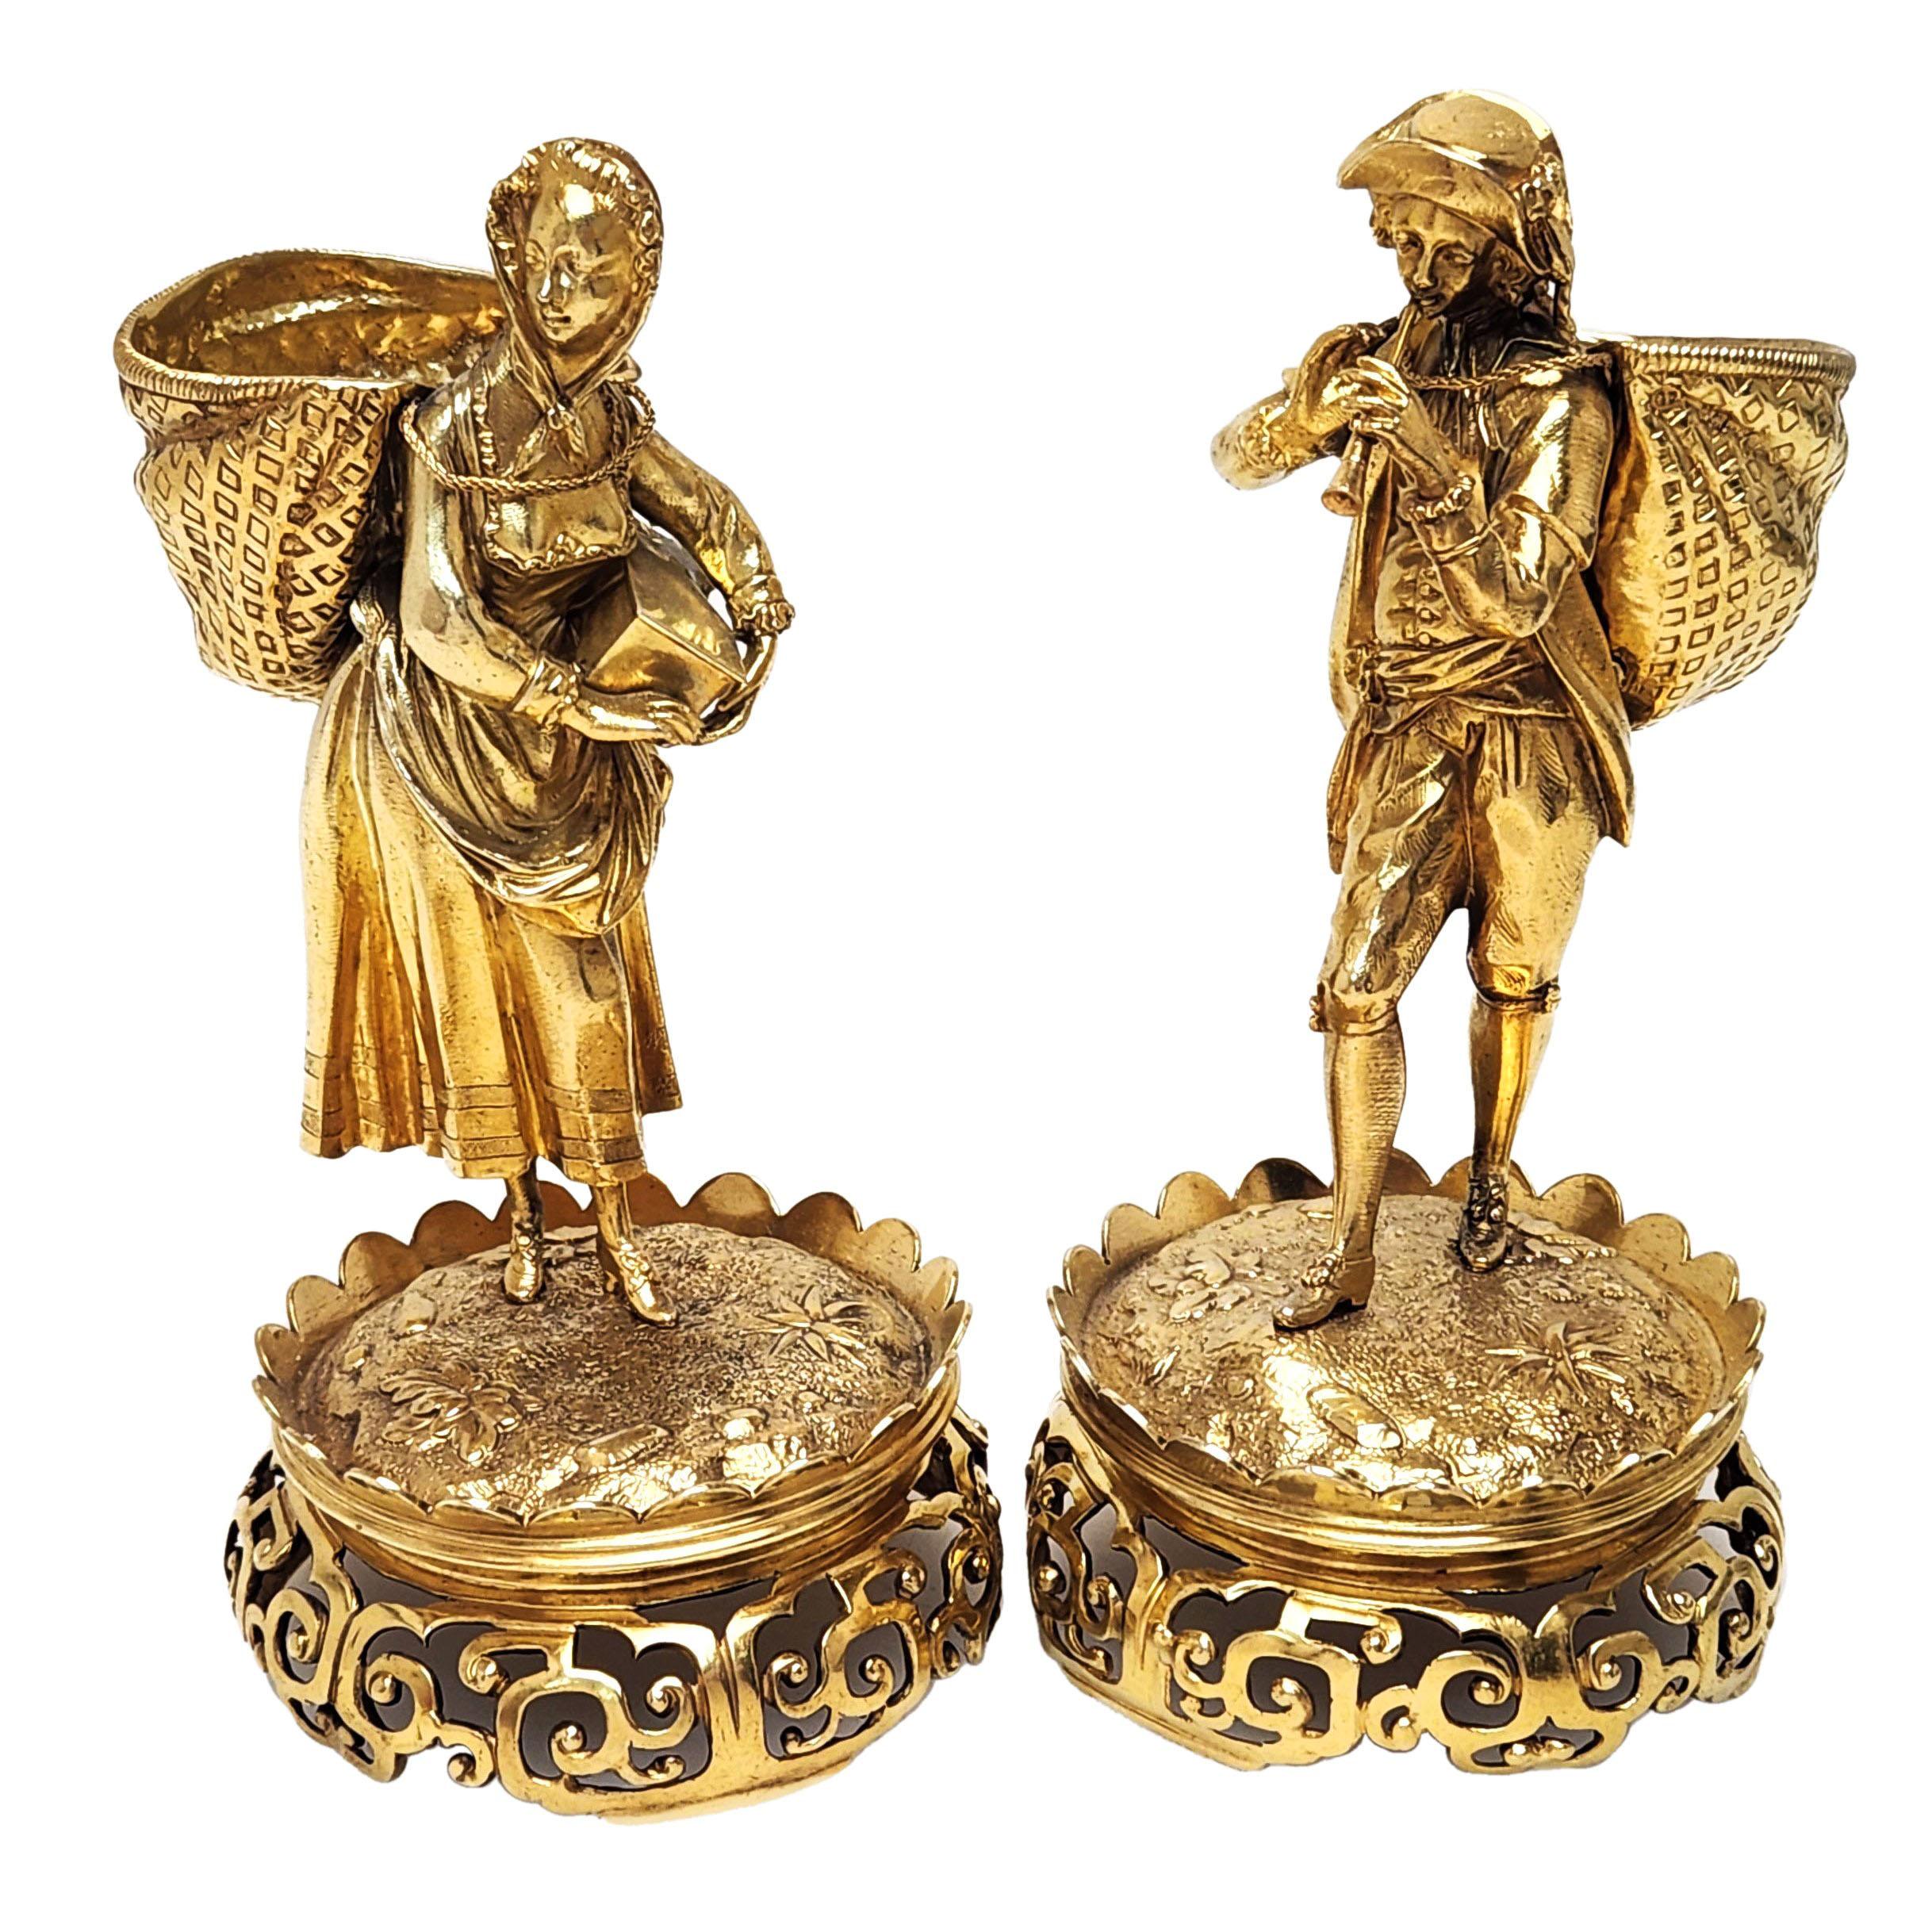 A pair of magnificent Antique Victorian Figural Salts known as Boy Girl Salts. This pair of Silver Salts is fashioned in the shape of a male and a female figure as peasants. The Girl has a Basket on her back and a Box in her arms. The Boy us wearing